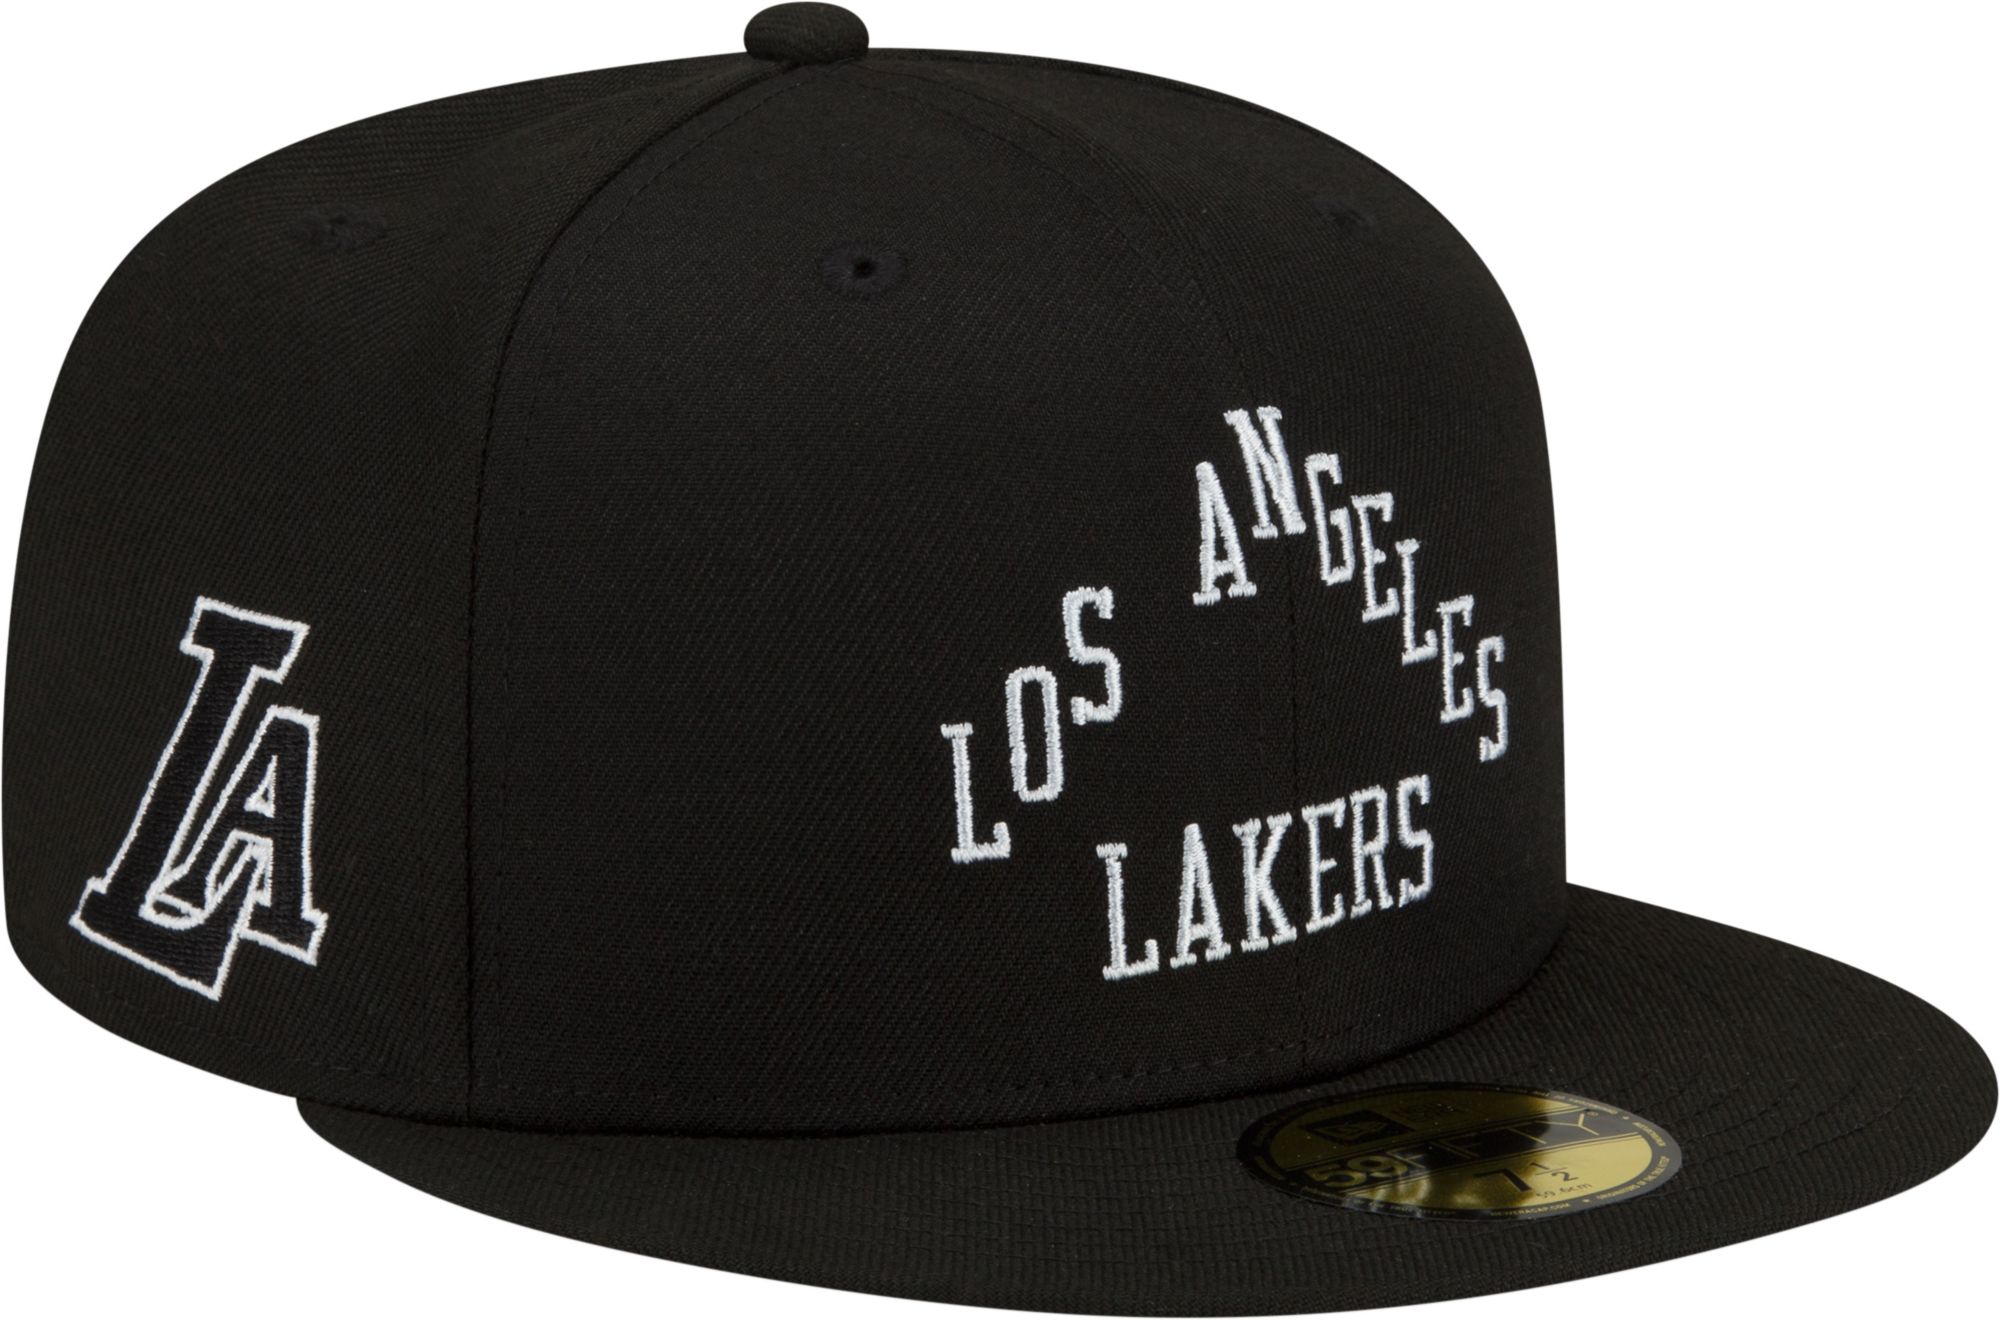 Los Angeles Lakers Hats  Curbside Pickup Available at DICK'S